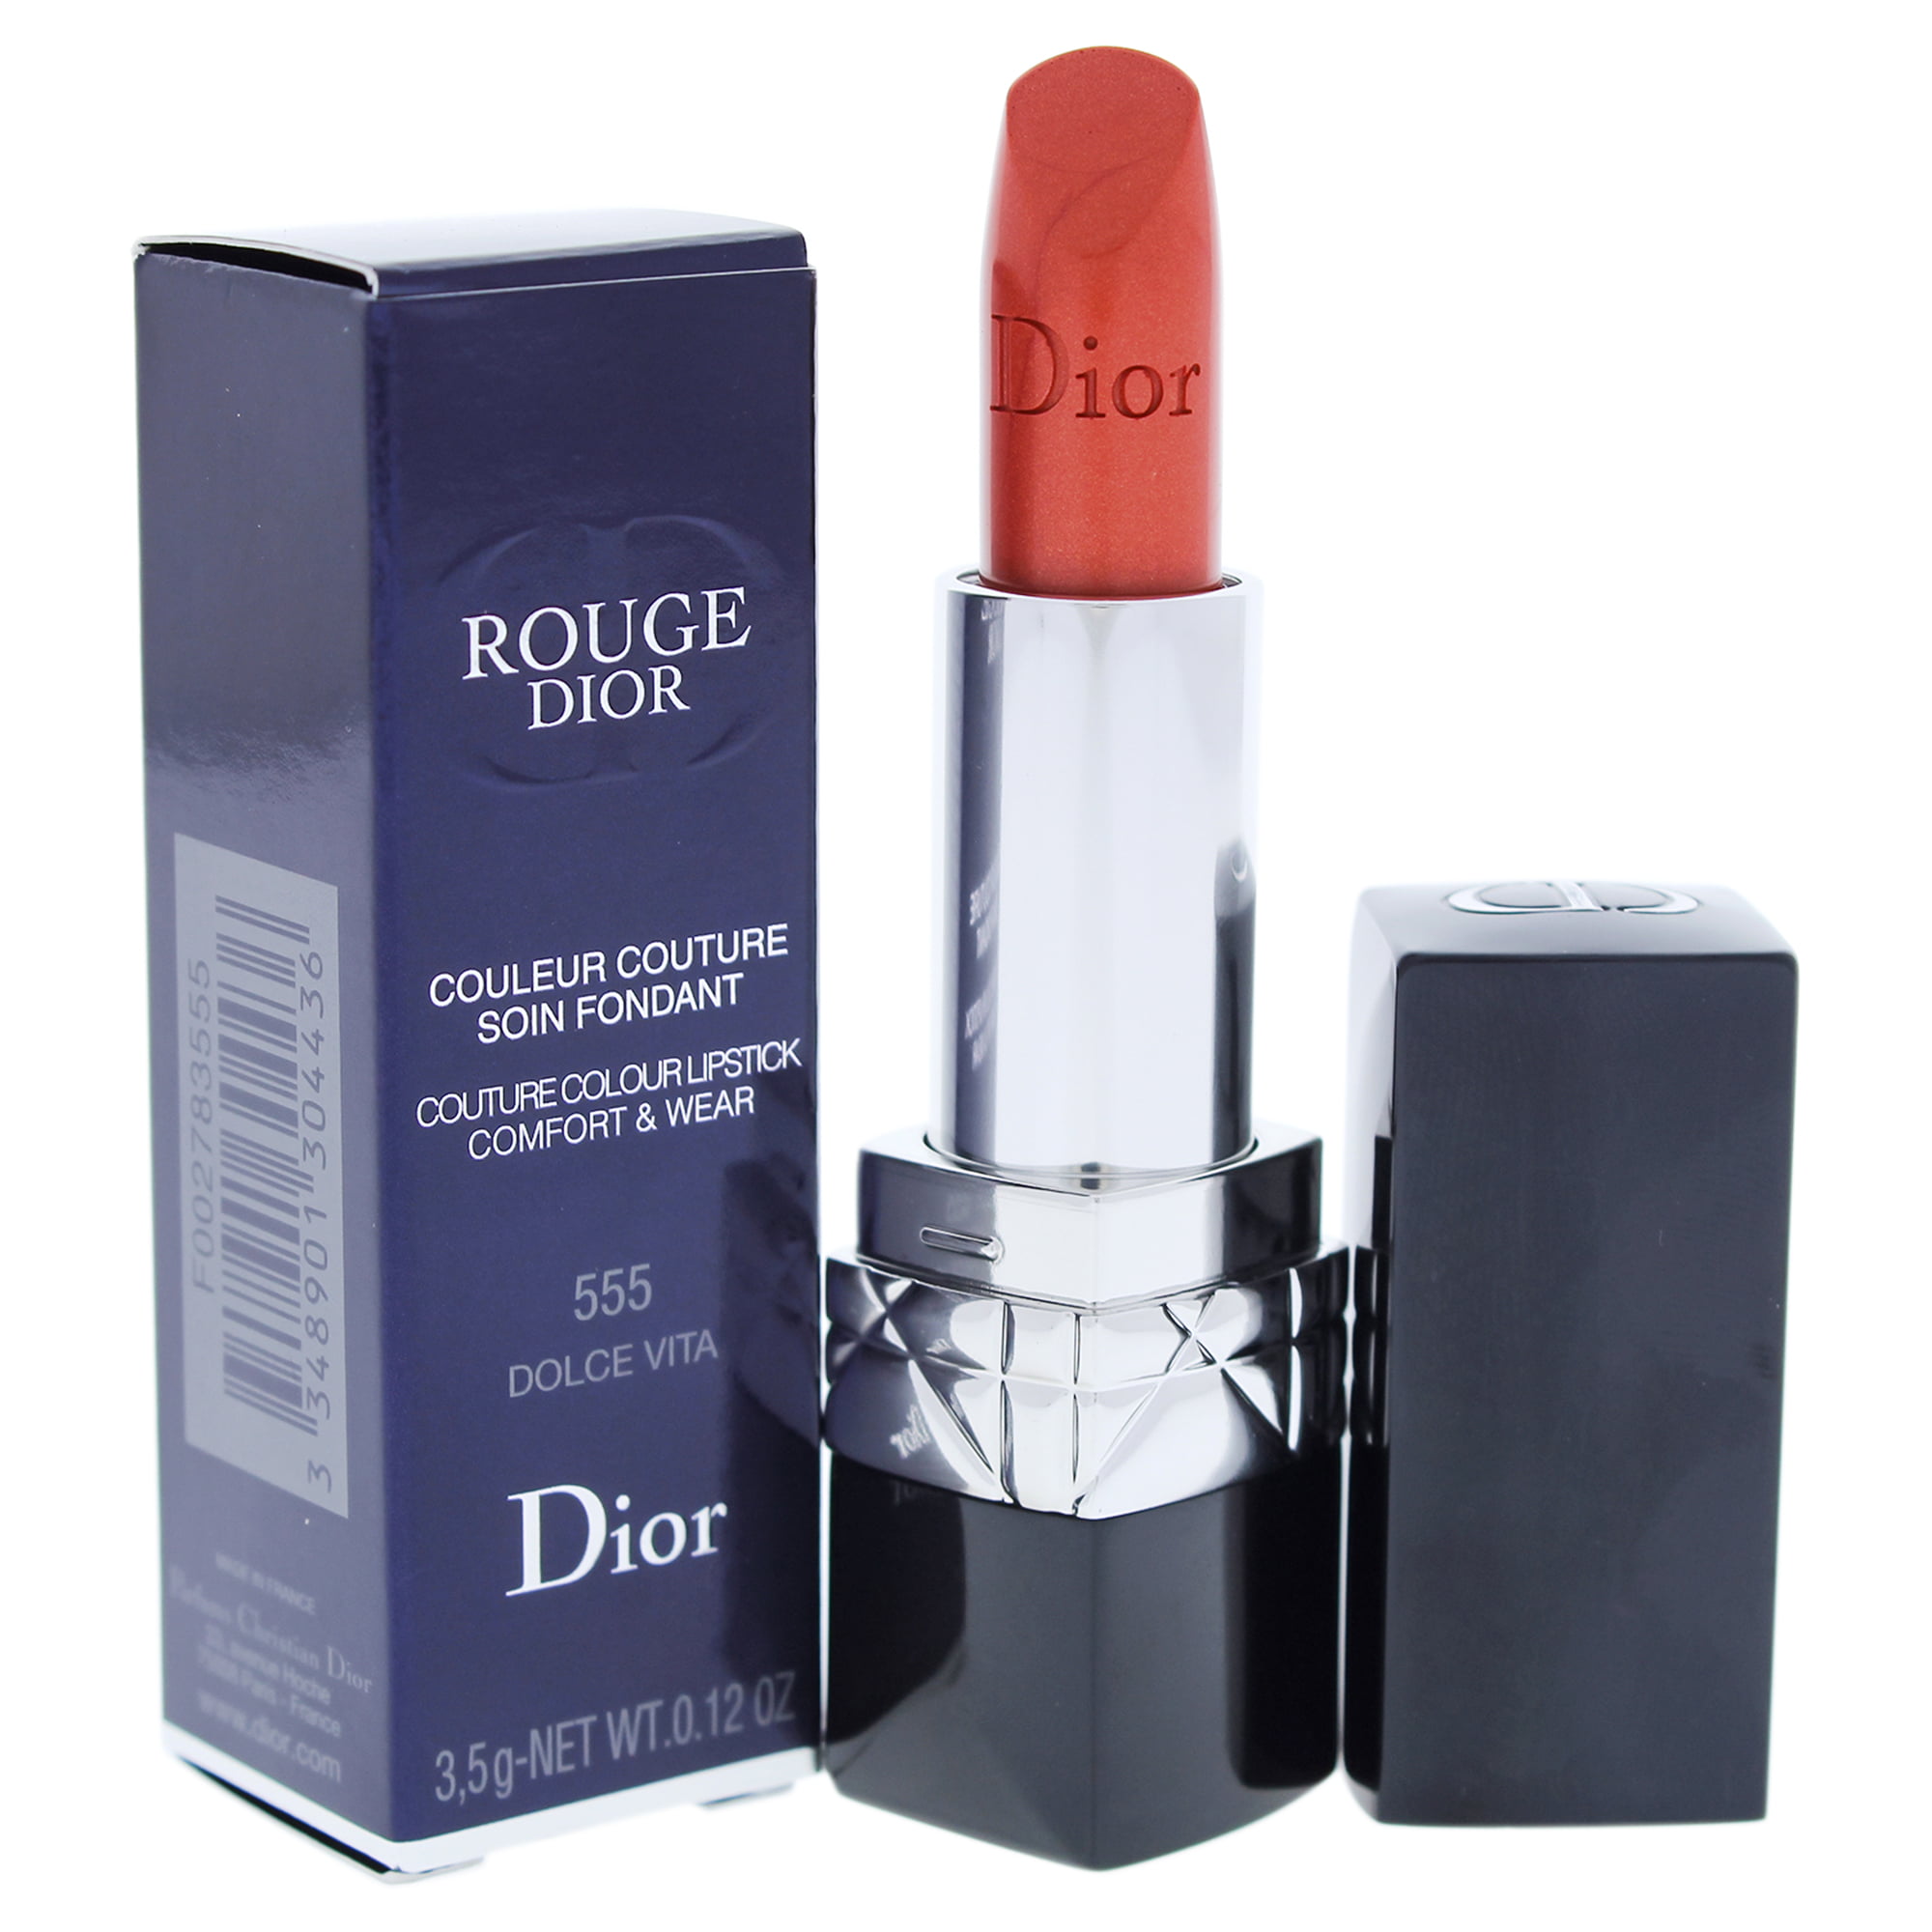 dior rouge 555